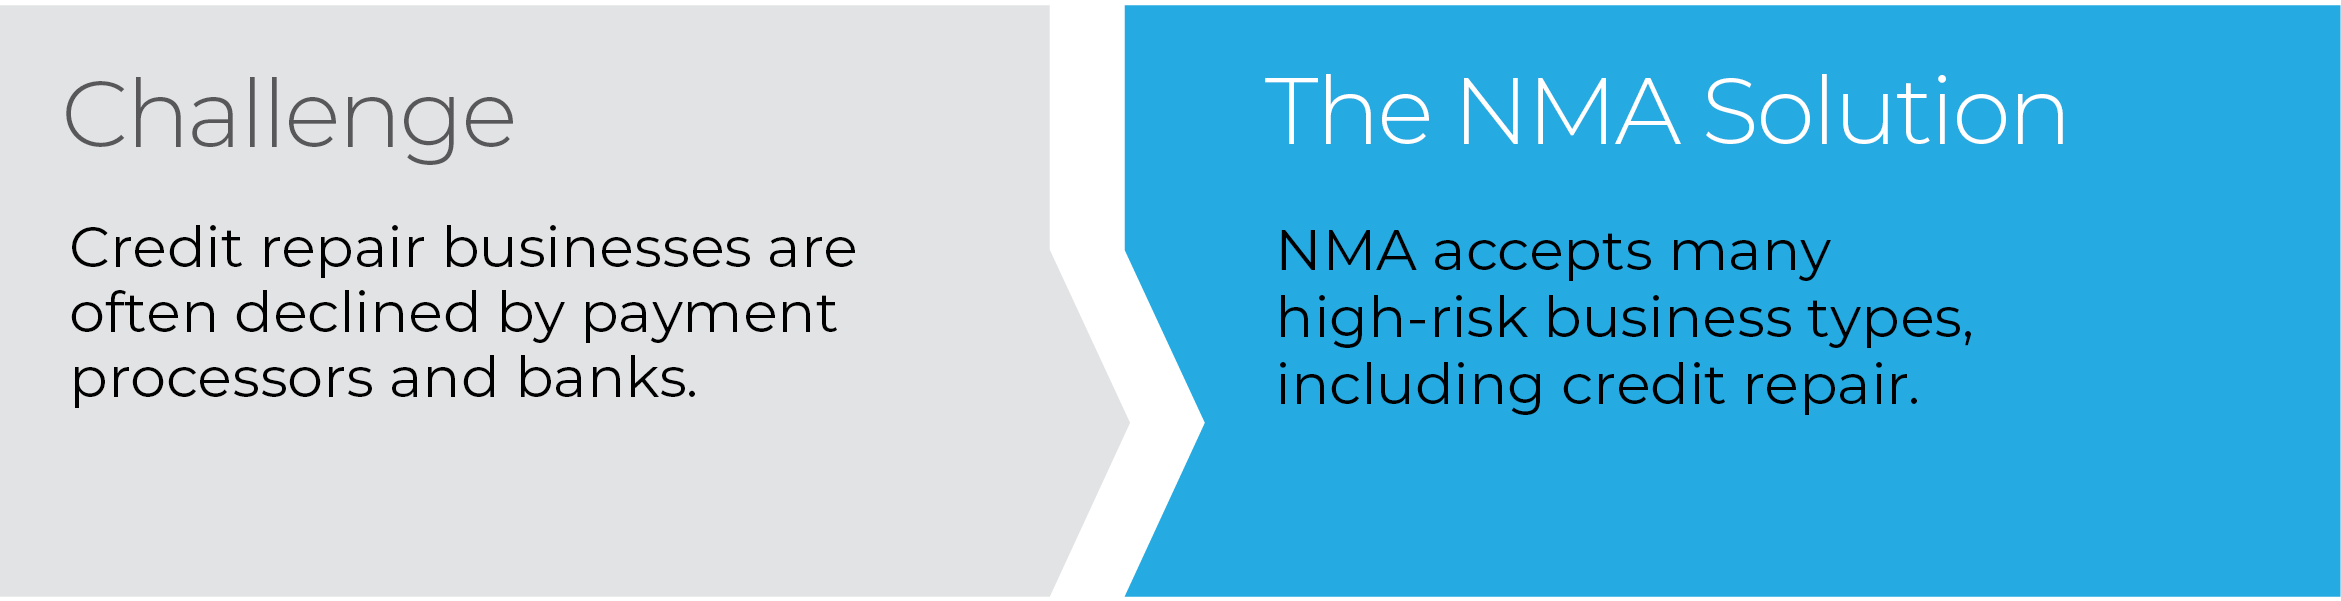 NMA accepts many high-risk business types, including credit repair.